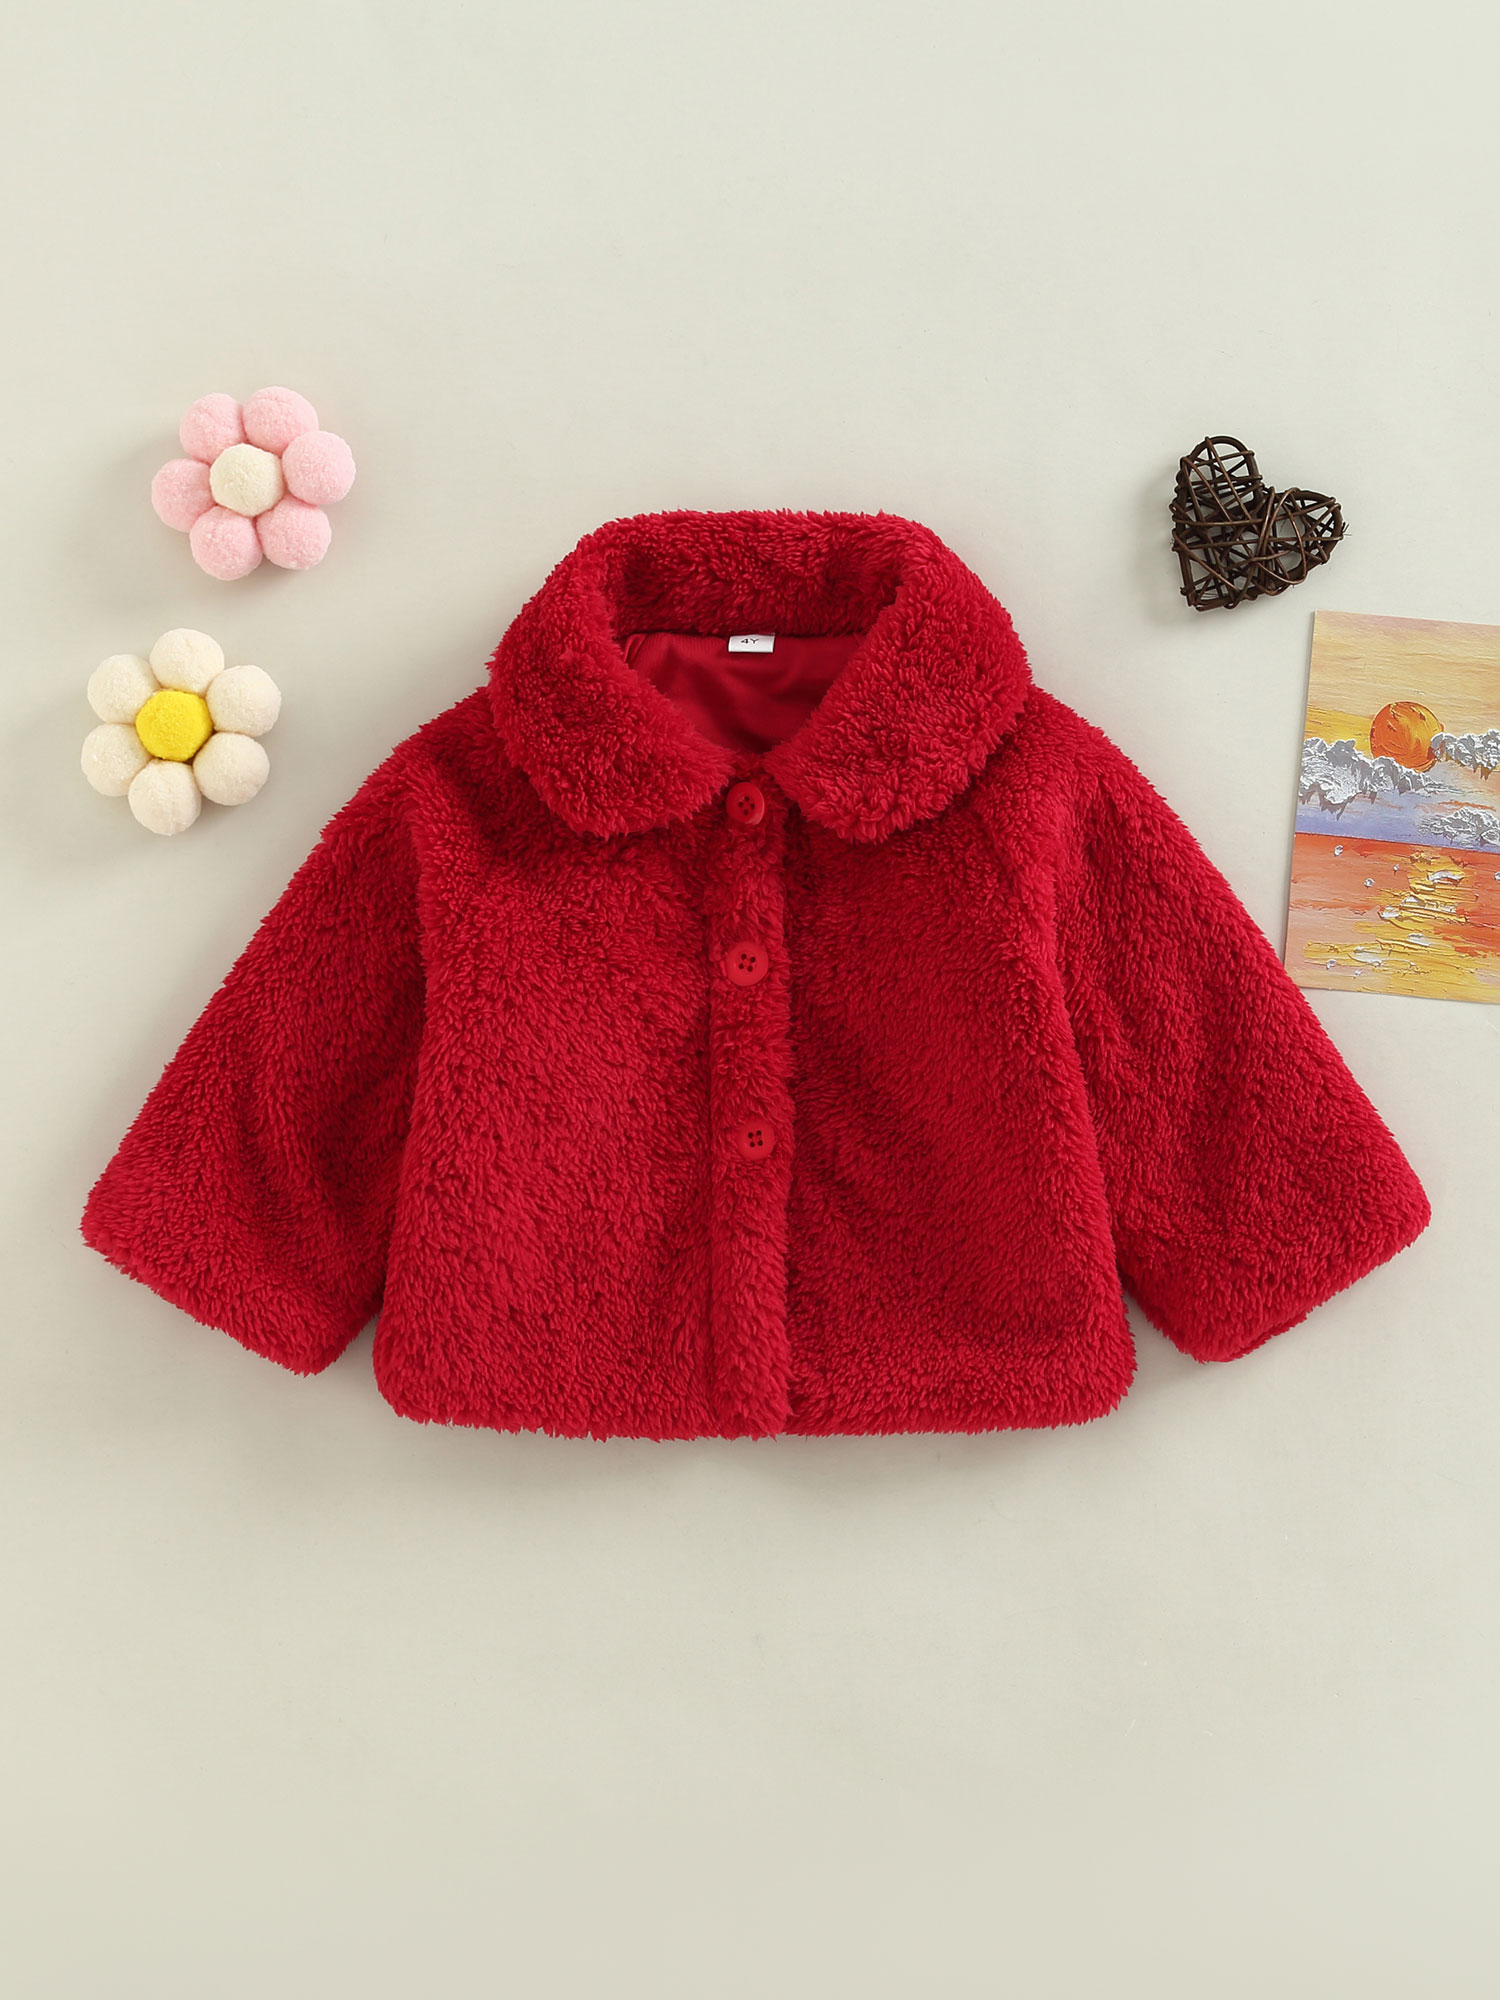 Licupiee Infant Newborn Baby Girl Plush Coat Warm Lapel Long Sleeve Button Down Red Plush Jacket Fall Winter Outwear - image 2 of 6